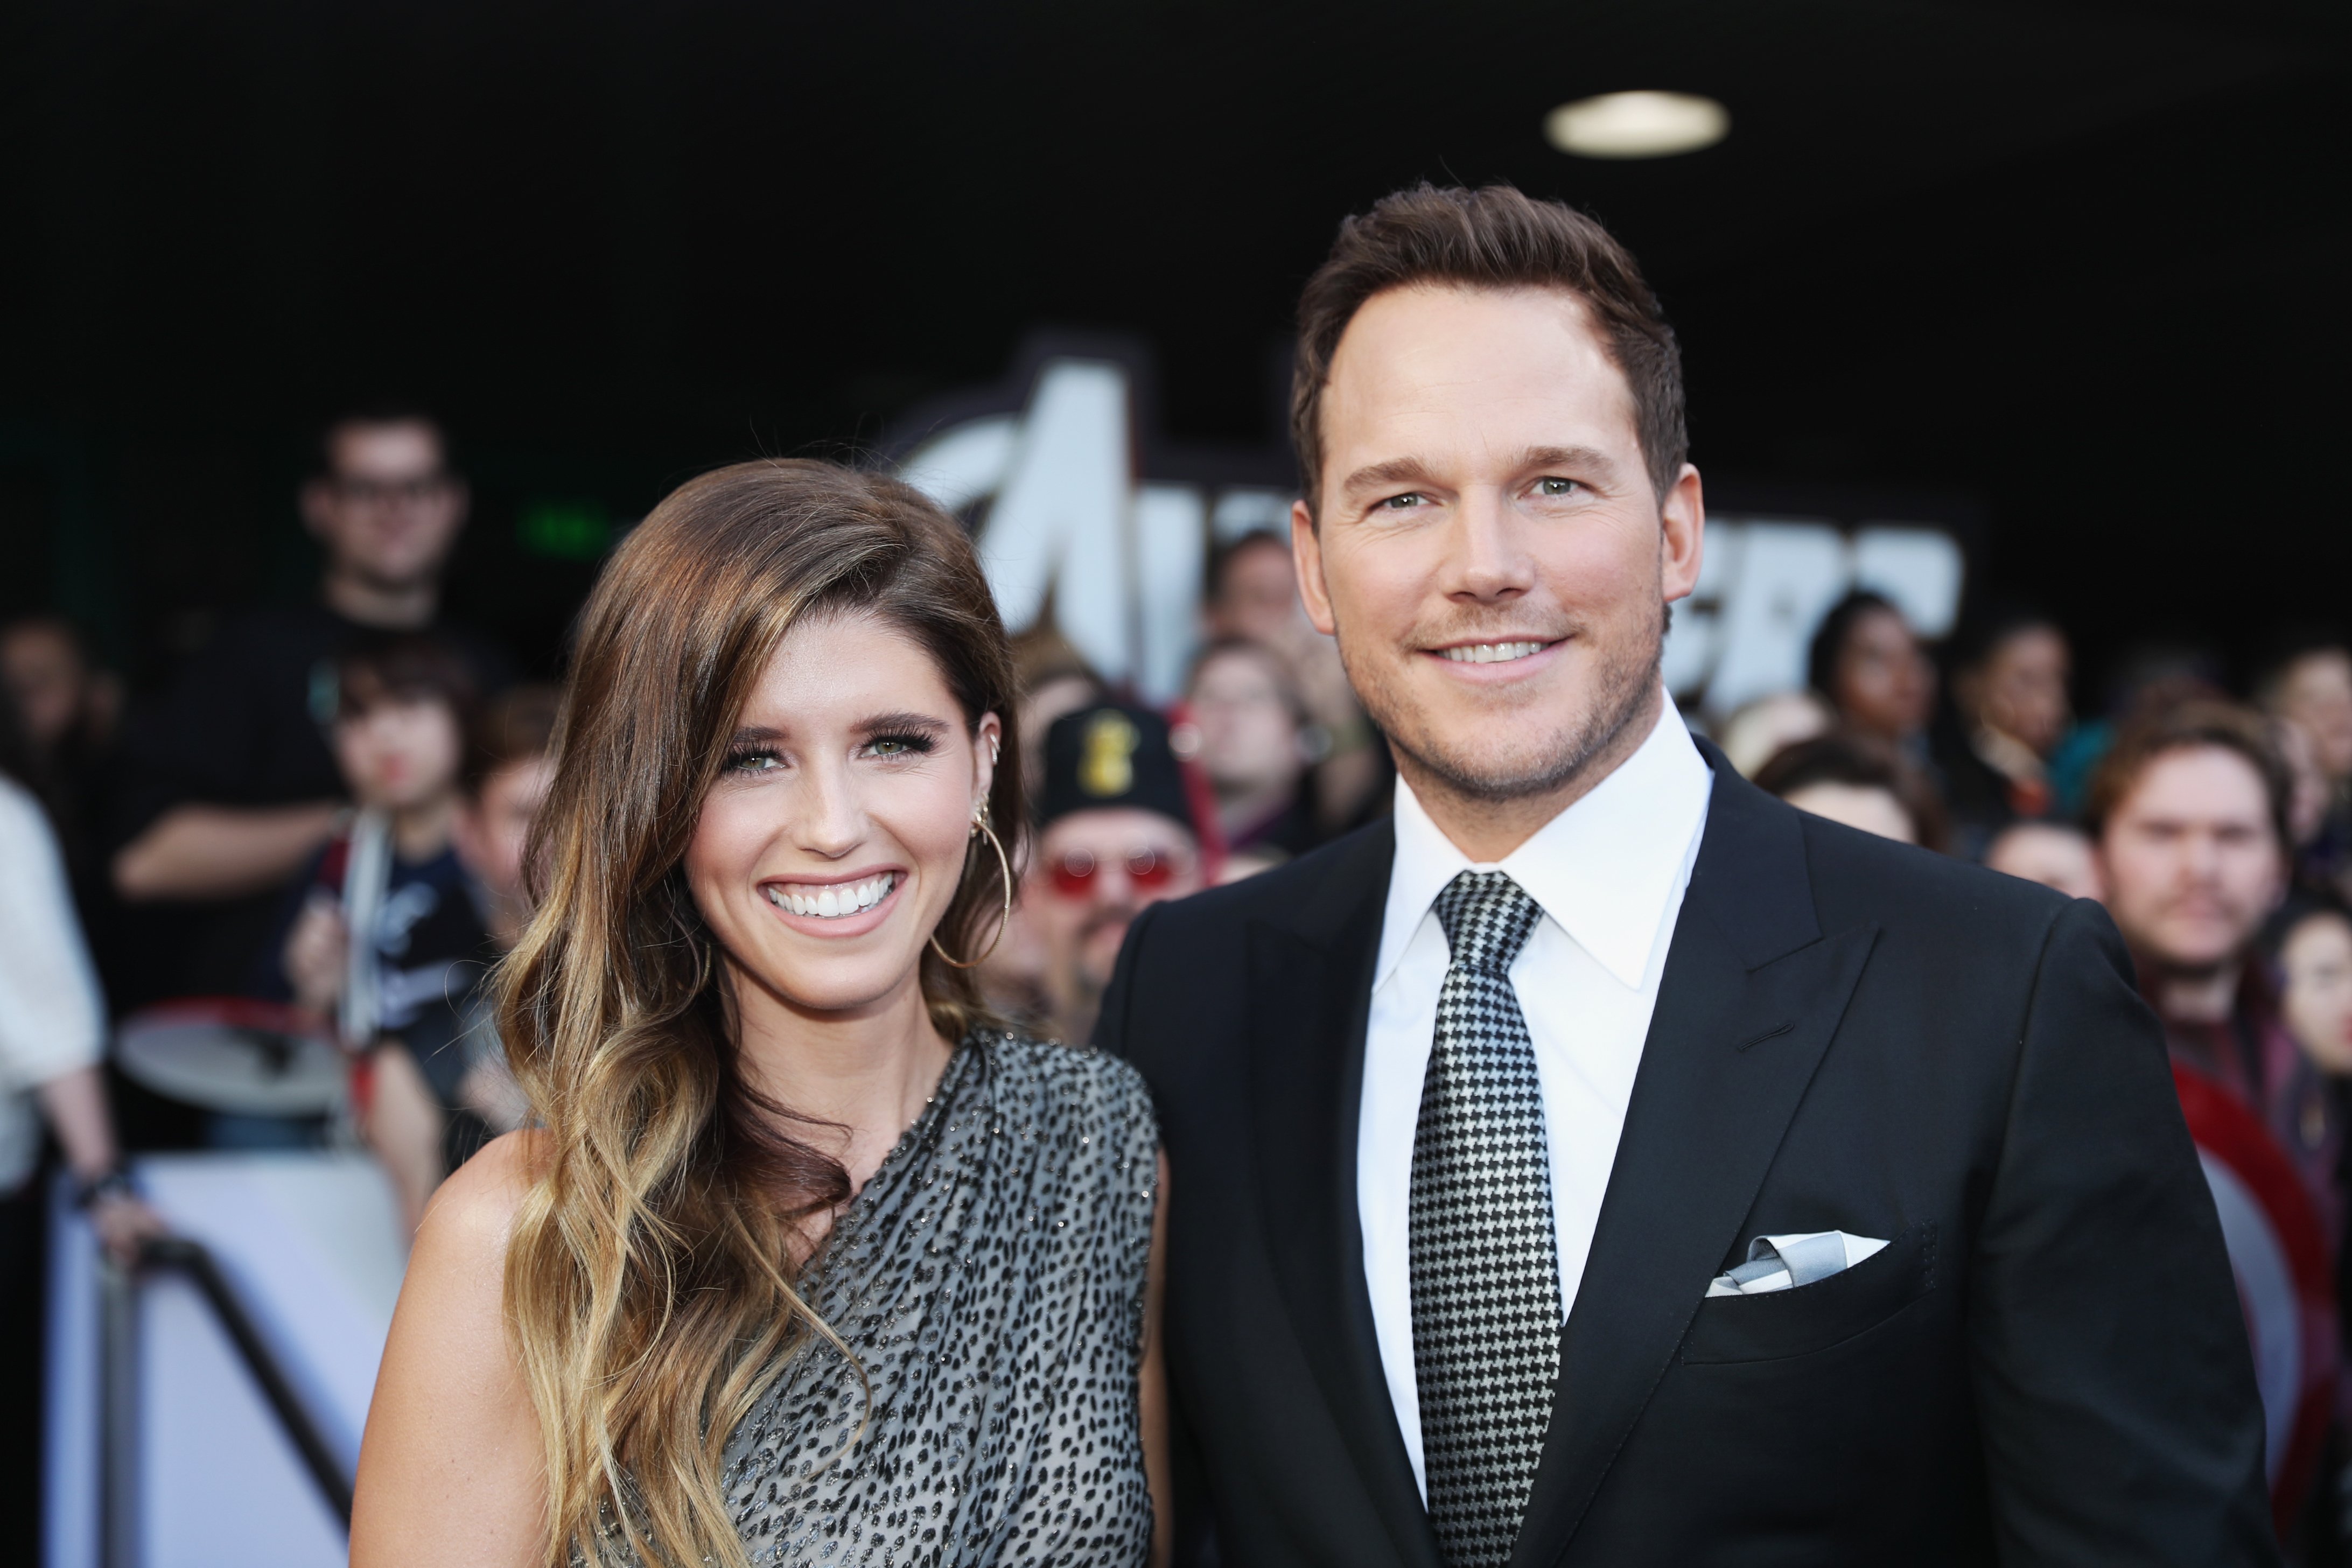 Katherine Schwarzenegger and Chris Pratt attend the premiere of "Avengers: Endgame" in Los Angeles, on April 23, 2019 | Photo: Getty Images